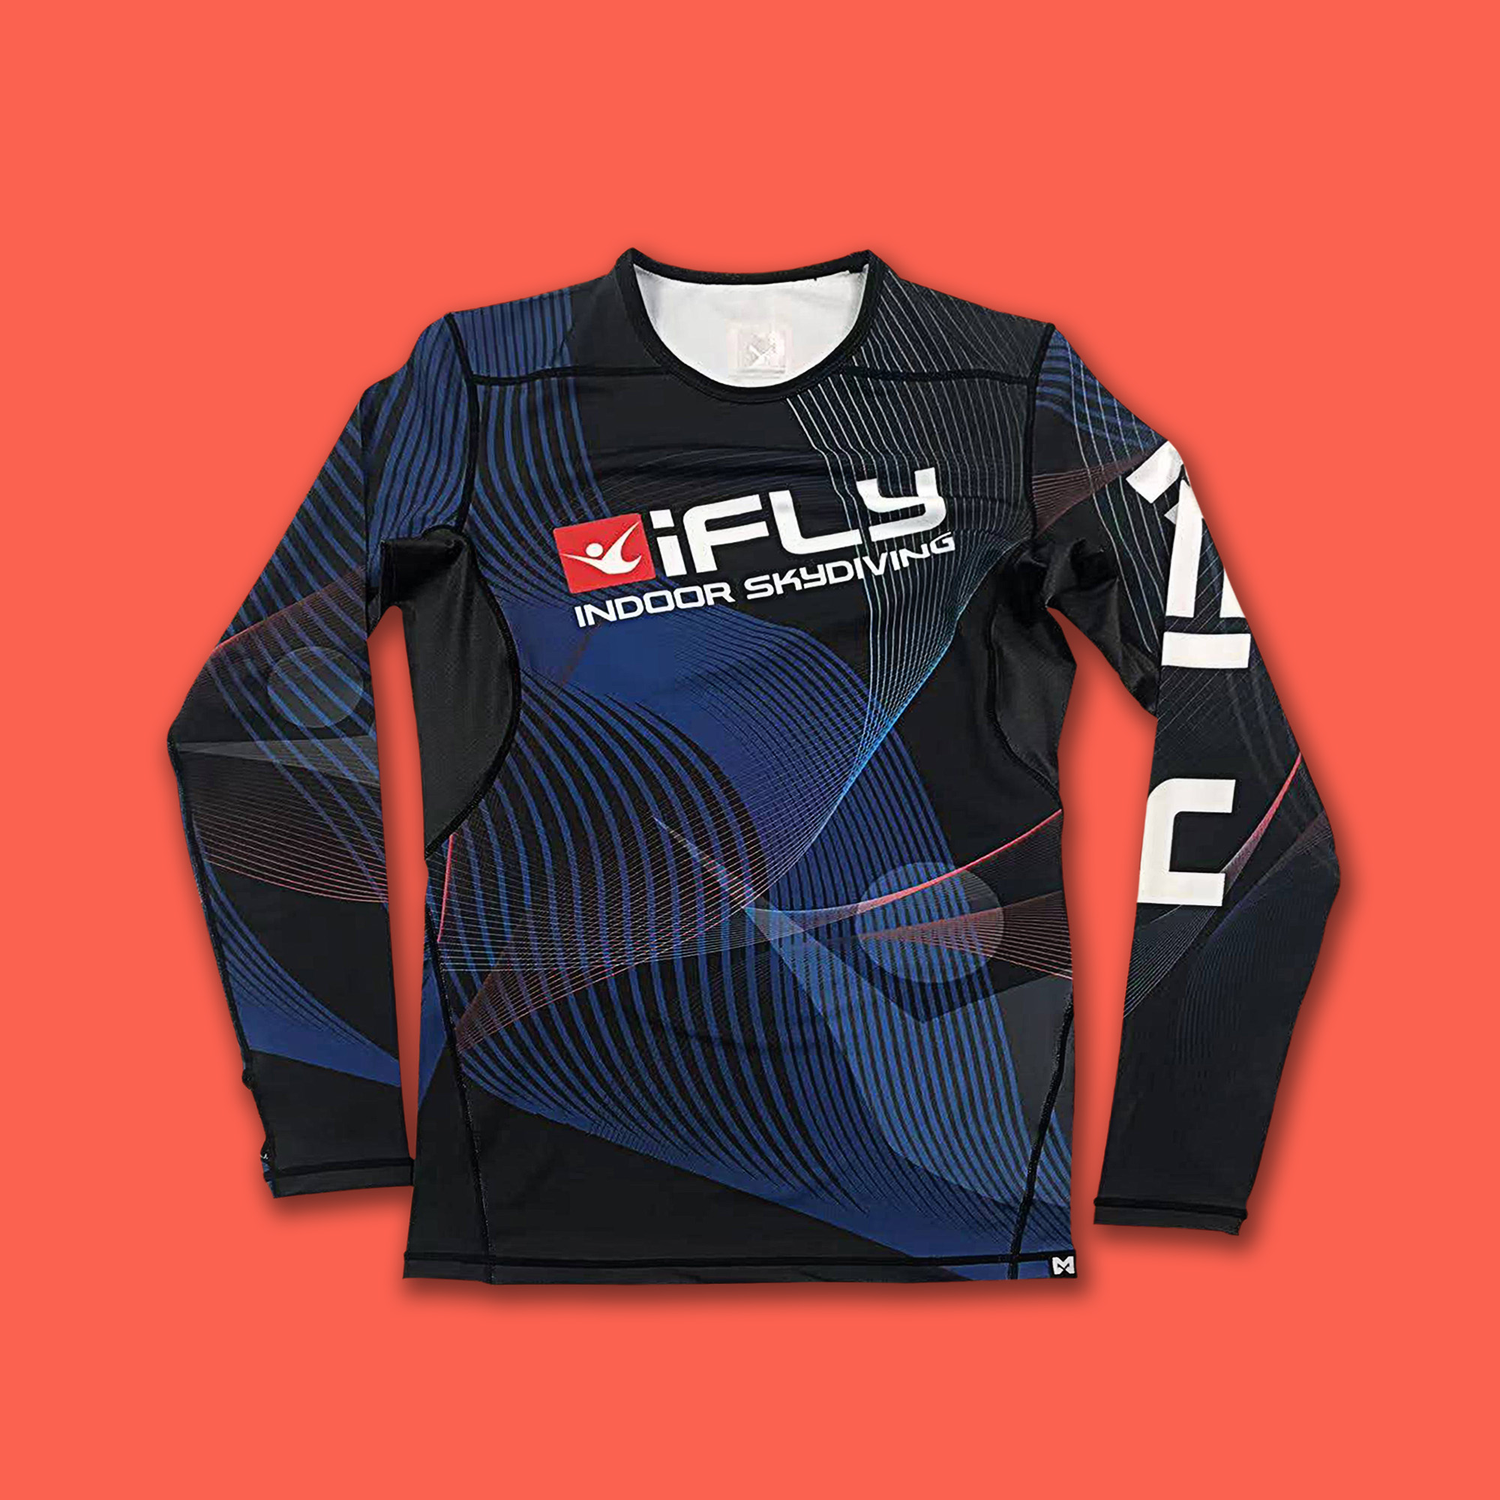 Ifly Melbourne Official Merchandise